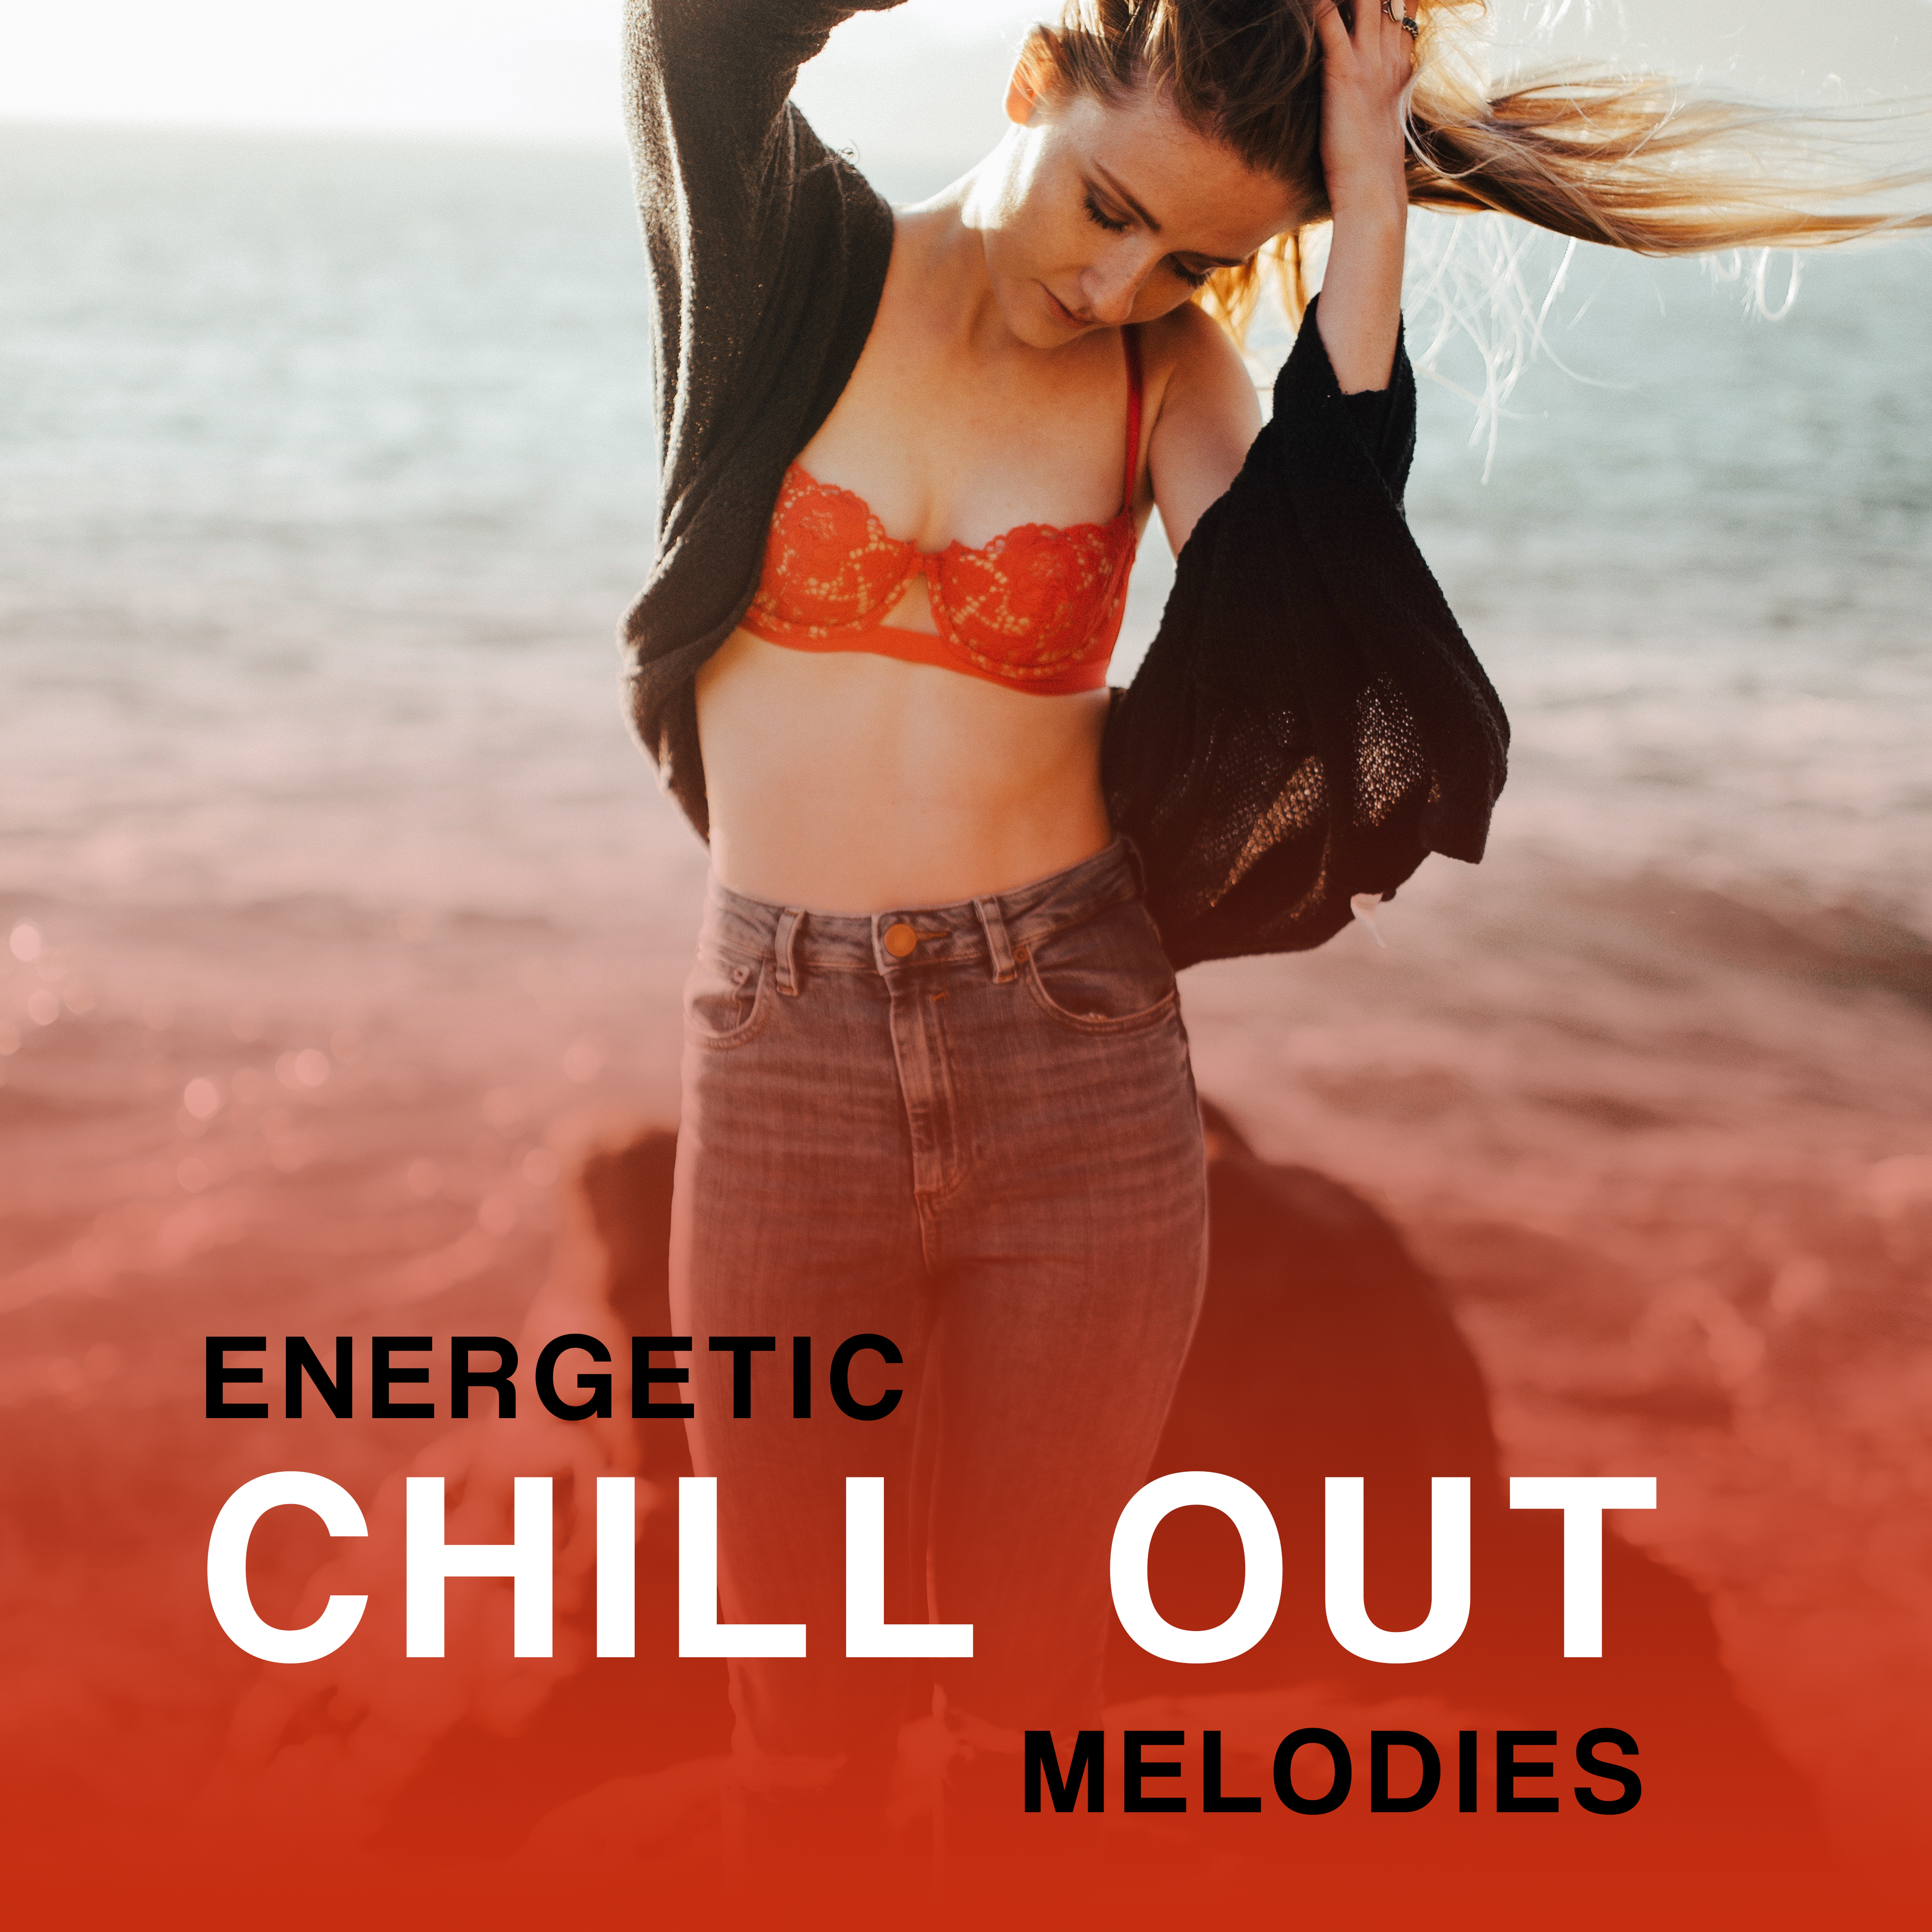 Energetic Chill Out Melodies